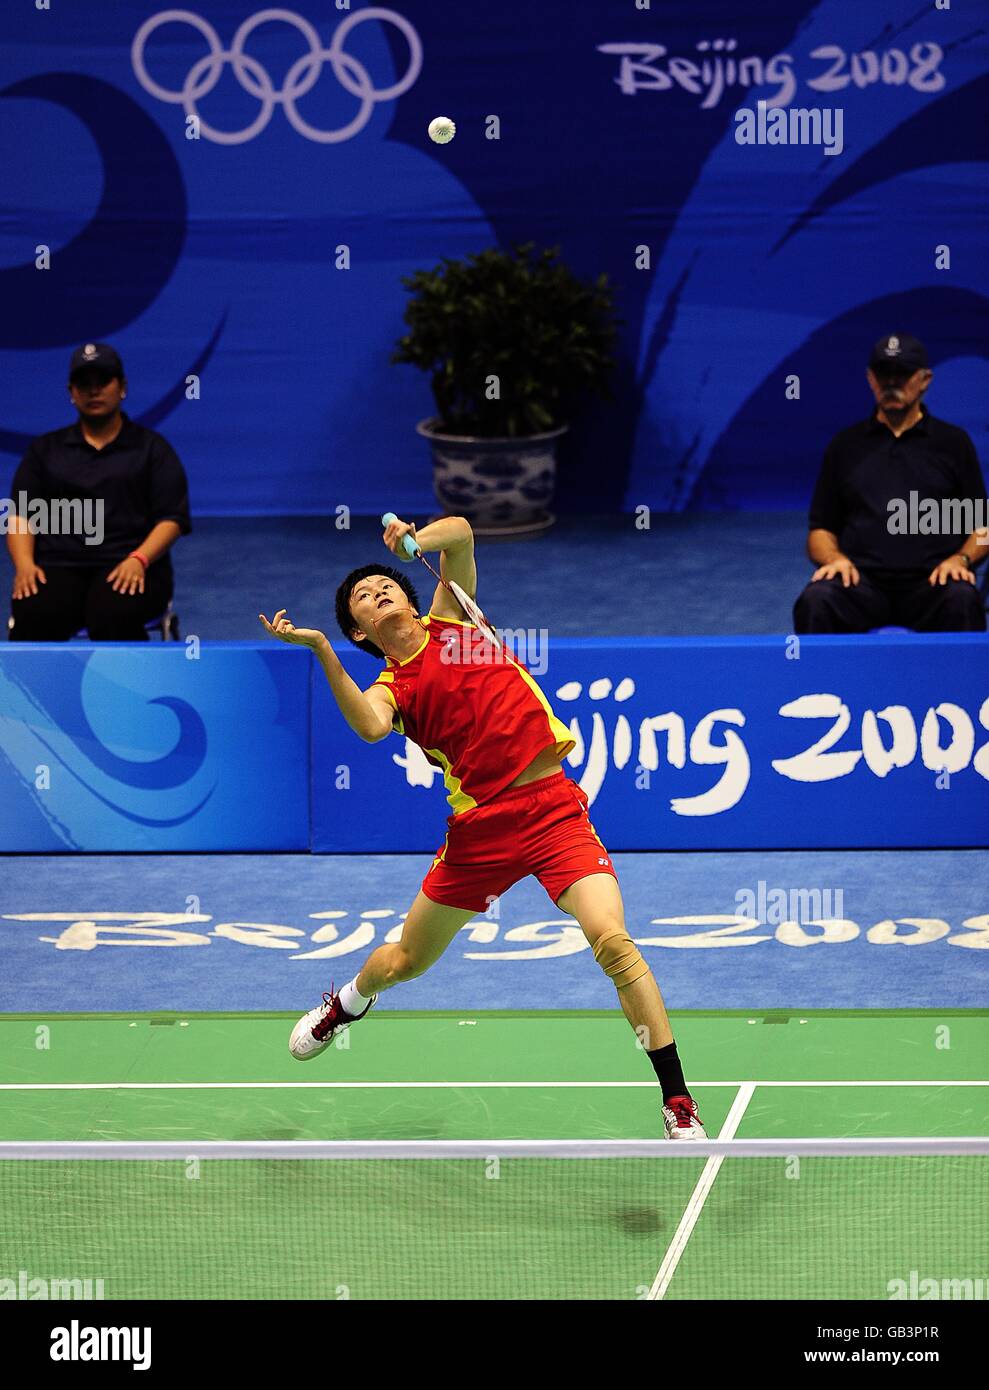 China's Boa Chunlai in action in the men's badminton singles quarterfinals at the Beijing University of Technology Gymnasium during the 2008 Olympic Games in Beijing, China. Chunlai lost the match 0-2. Stock Photo